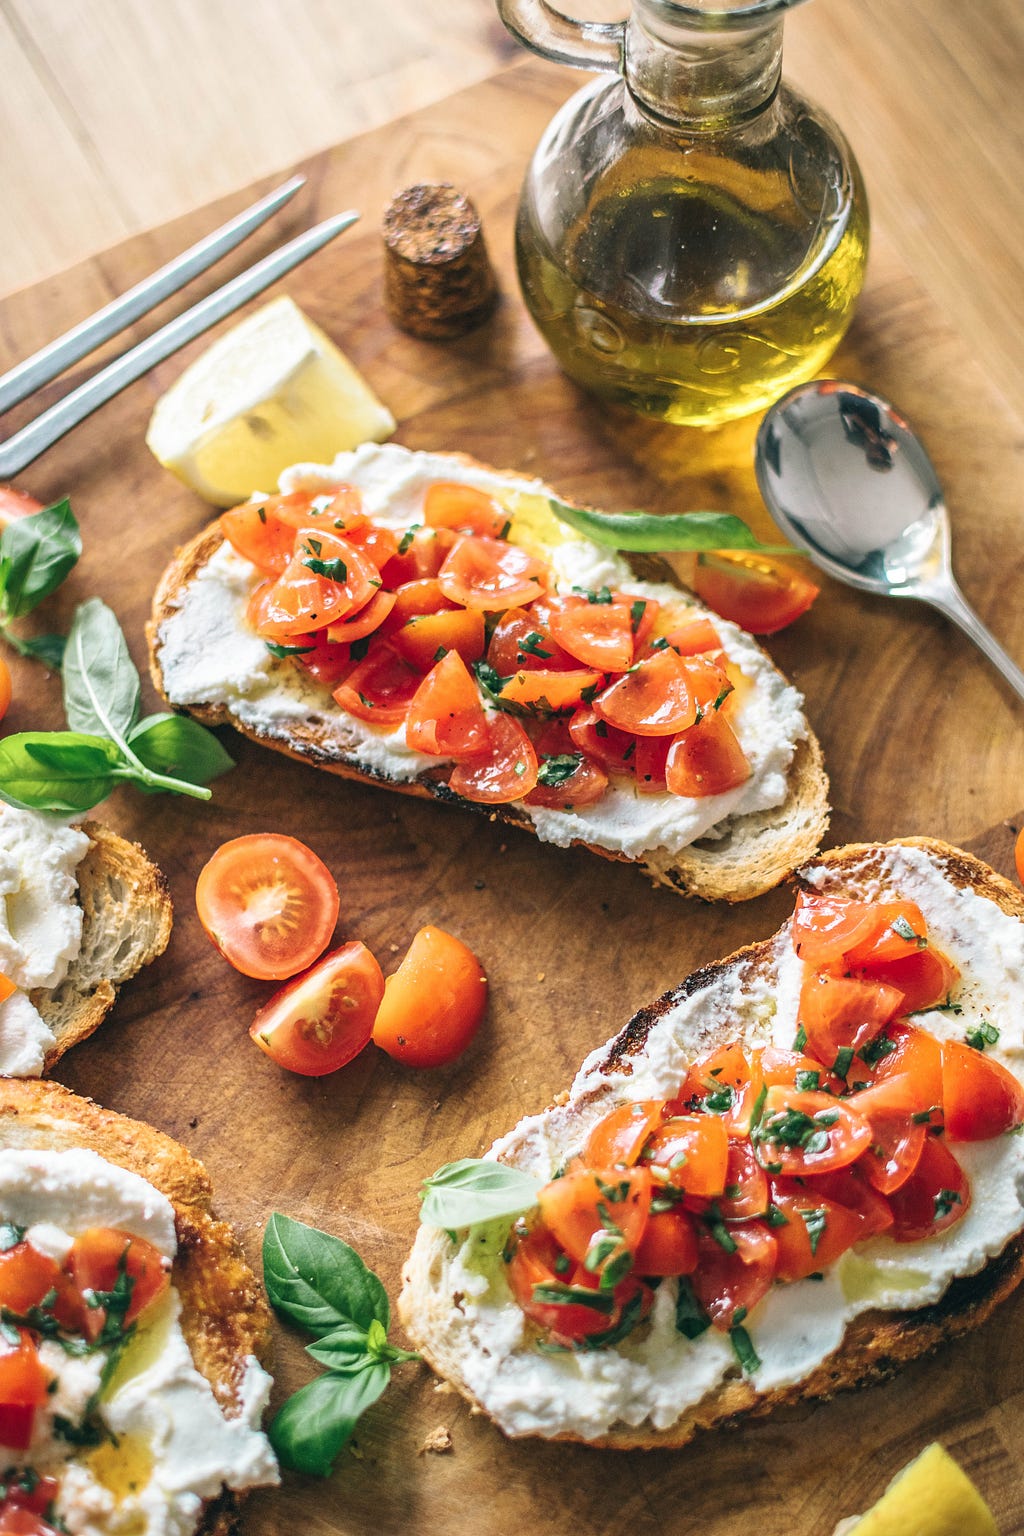 Oilve oil with some bread and salad — The Ultimate Guide to Choosing the Best Cooking Oil